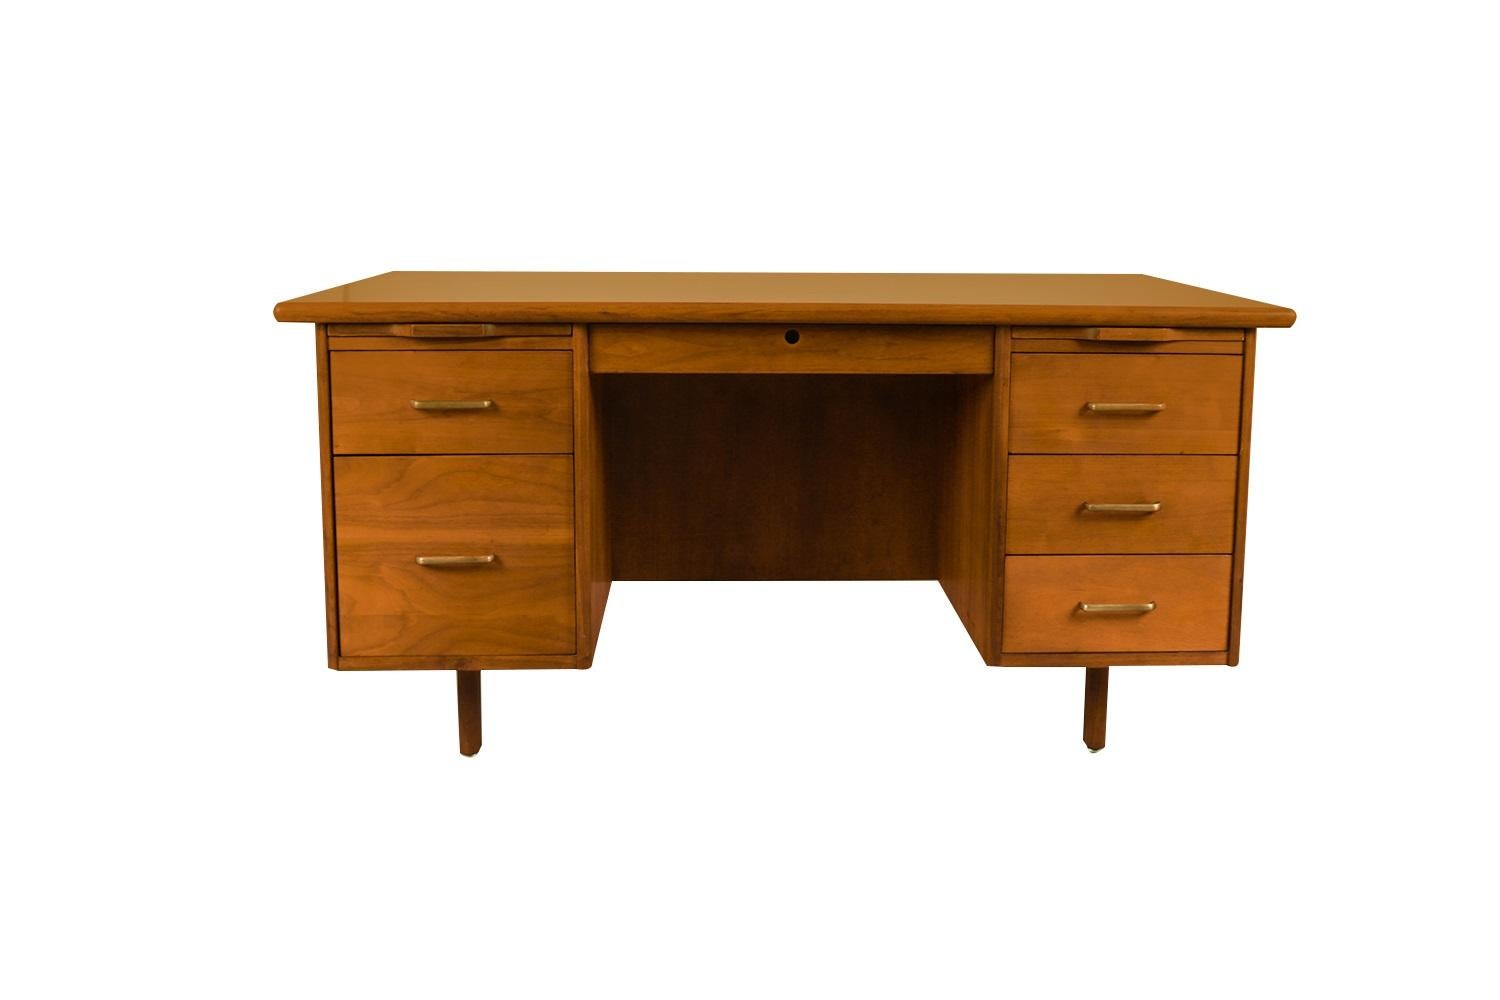 Beautiful Mid-Century Modern walnut executive Desk by Standard Furniture Company Herkimer, NY. Large Beautiful remarkable statement in design and craftsmanship. This large mid century walnut executive size desk, precisely crafted in exceptional